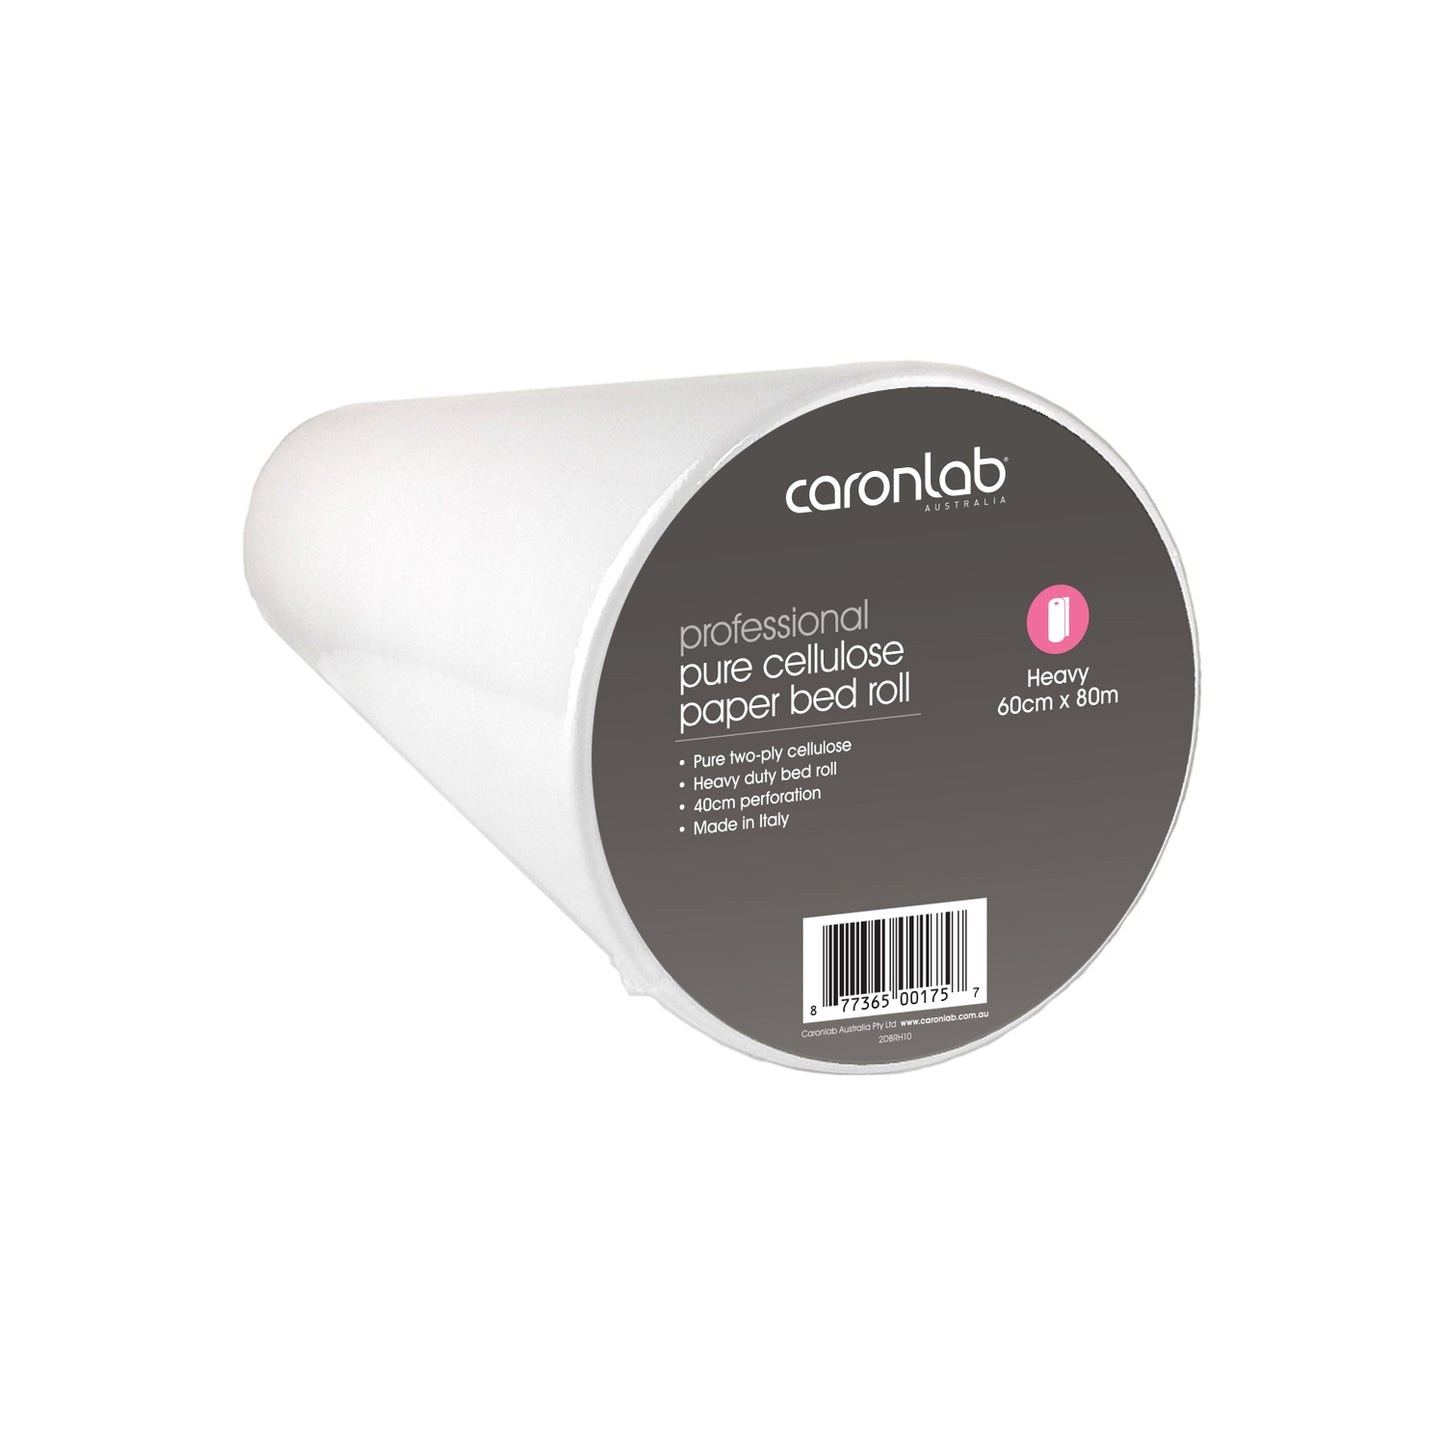 Caronlab Disposable Bed Roll Cellulose Paper Heavy 60cm X 80m - PICK UP ONLY